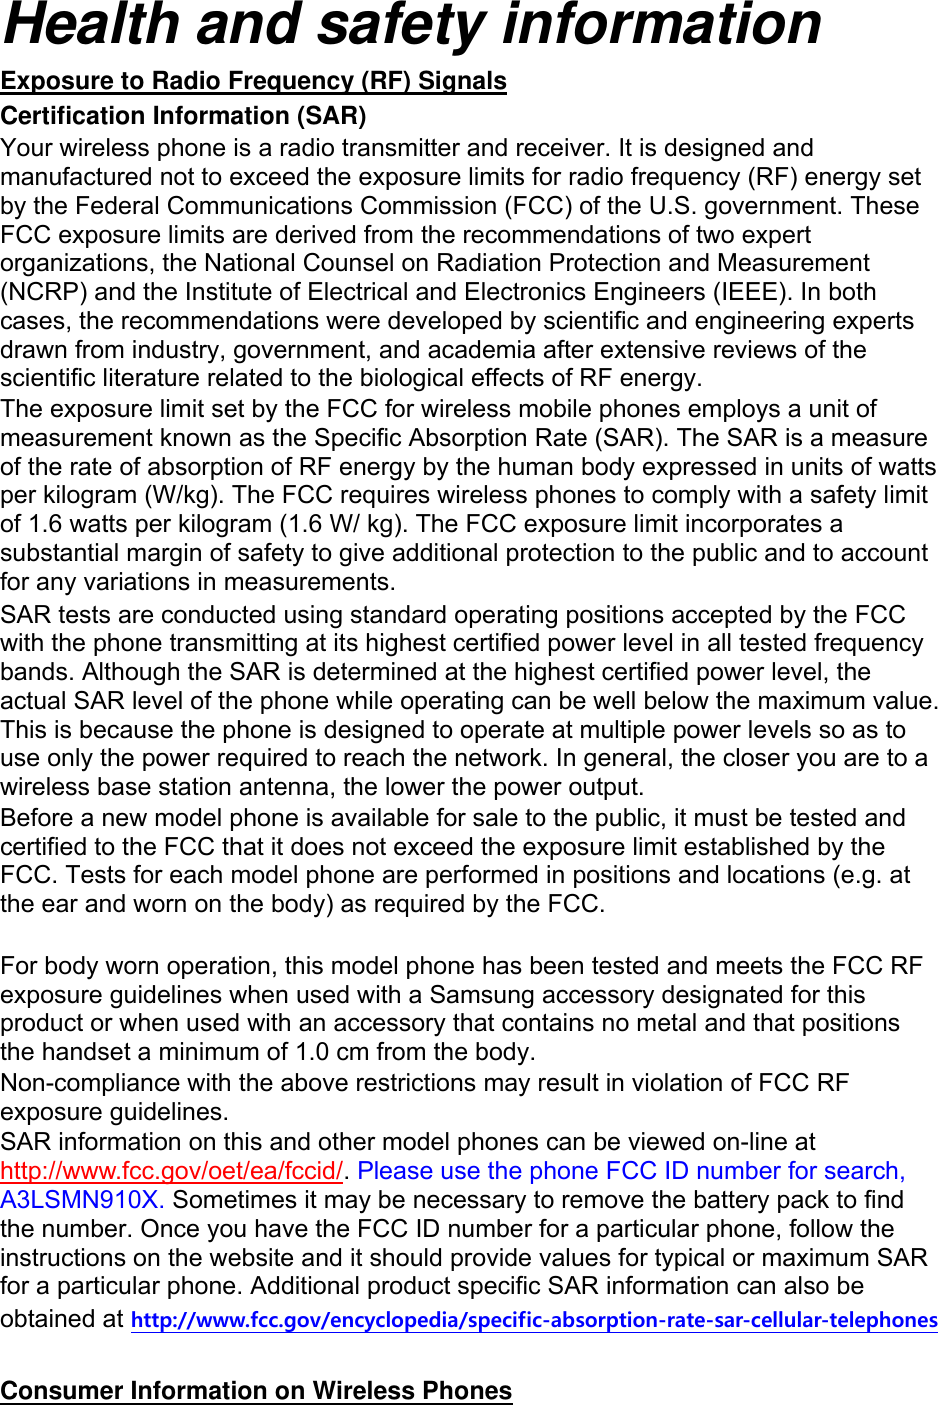 Health and safety information Exposure to Radio Frequency (RF) Signals Certification Information (SAR) Your wireless phone is a radio transmitter and receiver. It is designed and manufactured not to exceed the exposure limits for radio frequency (RF) energy set by the Federal Communications Commission (FCC) of the U.S. government. These FCC exposure limits are derived from the recommendations of two expert organizations, the National Counsel on Radiation Protection and Measurement (NCRP) and the Institute of Electrical and Electronics Engineers (IEEE). In both cases, the recommendations were developed by scientific and engineering experts drawn from industry, government, and academia after extensive reviews of the scientific literature related to the biological effects of RF energy. The exposure limit set by the FCC for wireless mobile phones employs a unit of measurement known as the Specific Absorption Rate (SAR). The SAR is a measure of the rate of absorption of RF energy by the human body expressed in units of watts per kilogram (W/kg). The FCC requires wireless phones to comply with a safety limit of 1.6 watts per kilogram (1.6 W/ kg). The FCC exposure limit incorporates a substantial margin of safety to give additional protection to the public and to account for any variations in measurements. SAR tests are conducted using standard operating positions accepted by the FCC with the phone transmitting at its highest certified power level in all tested frequency bands. Although the SAR is determined at the highest certified power level, the actual SAR level of the phone while operating can be well below the maximum value. This is because the phone is designed to operate at multiple power levels so as to use only the power required to reach the network. In general, the closer you are to a wireless base station antenna, the lower the power output. Before a new model phone is available for sale to the public, it must be tested and certified to the FCC that it does not exceed the exposure limit established by the FCC. Tests for each model phone are performed in positions and locations (e.g. at the ear and worn on the body) as required by the FCC.      For body worn operation, this model phone has been tested and meets the FCC RF exposure guidelines when used with a Samsung accessory designated for this product or when used with an accessory that contains no metal and that positions the handset a minimum of 1.0 cm from the body.   Non-compliance with the above restrictions may result in violation of FCC RF exposure guidelines. SAR information on this and other model phones can be viewed on-line at http://www.fcc.gov/oet/ea/fccid/. Please use the phone FCC ID number for search, A3LSMN910X. Sometimes it may be necessary to remove the battery pack to find the number. Once you have the FCC ID number for a particular phone, follow the instructions on the website and it should provide values for typical or maximum SAR for a particular phone. Additional product specific SAR information can also be obtained at http://www.fcc.gov/encyclopedia/specific-absorption-rate-sar-cellular-telephones  Consumer Information on Wireless Phones 